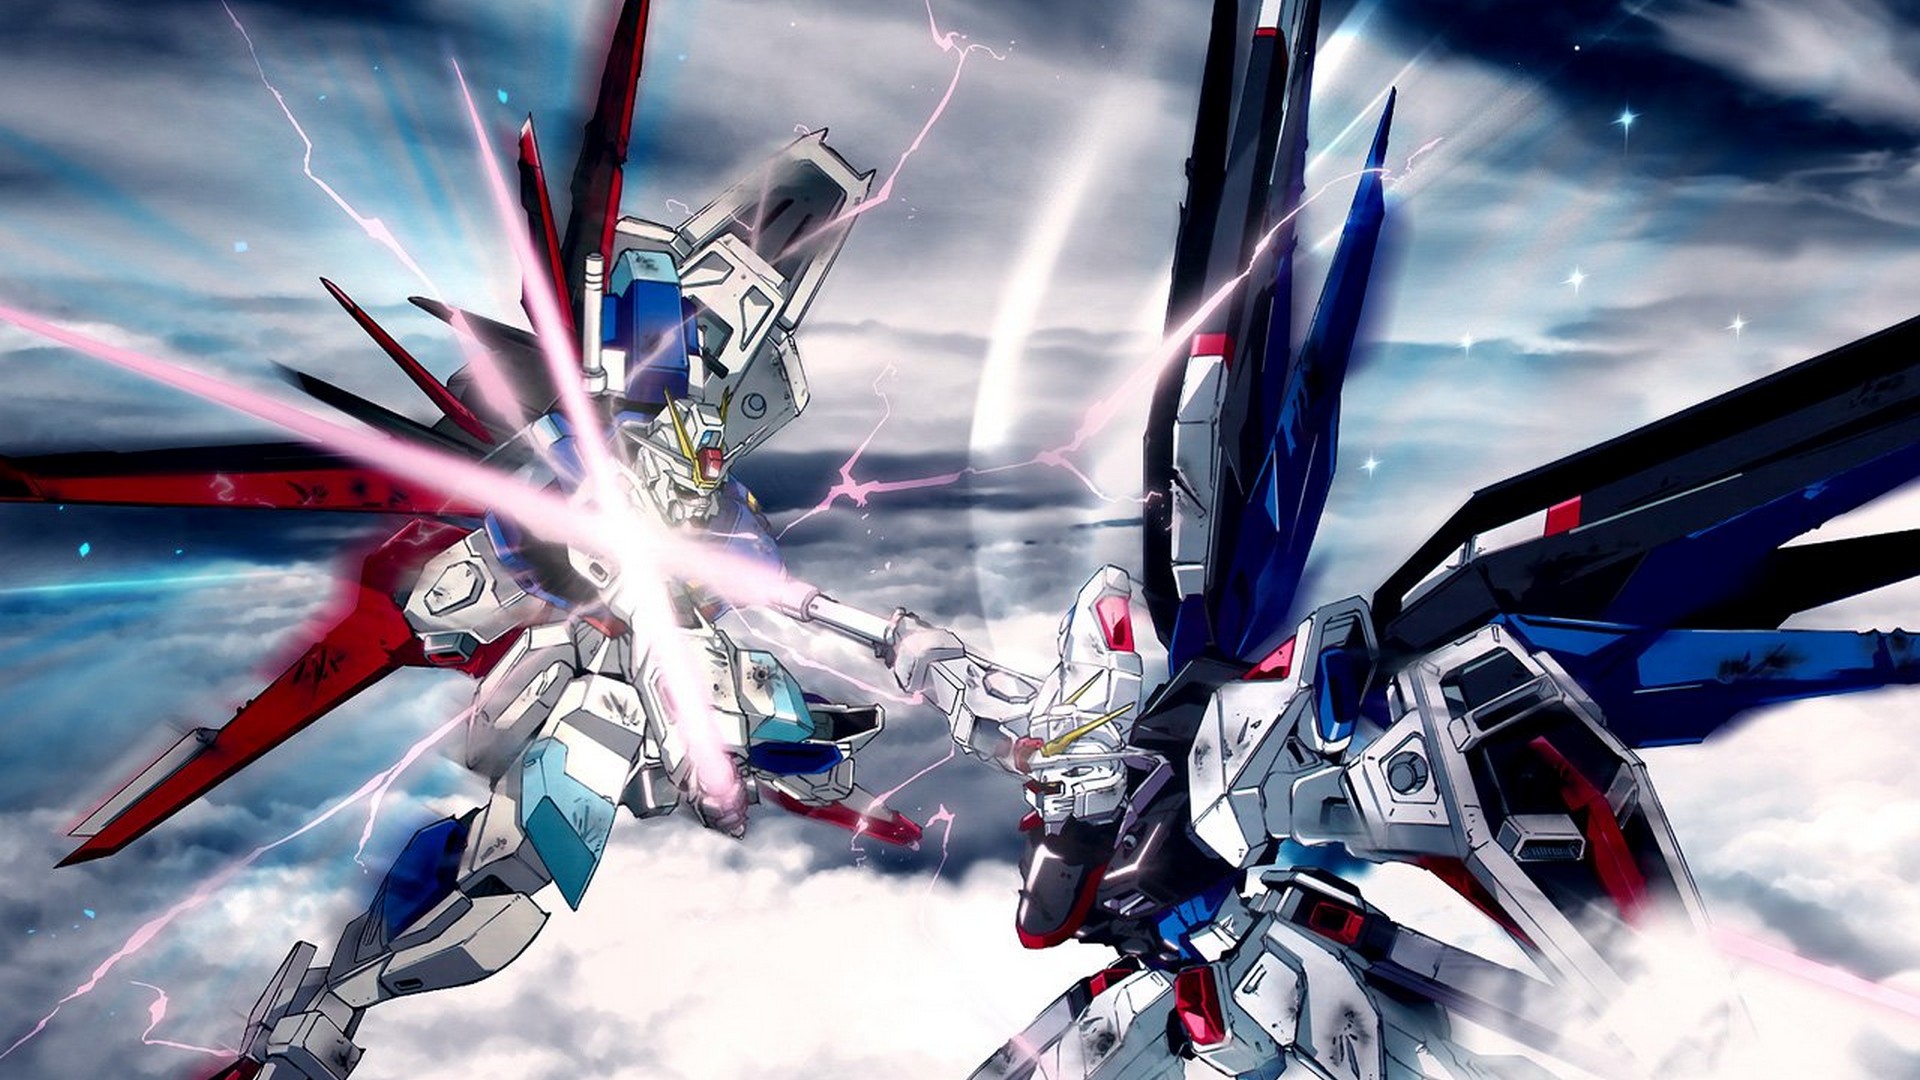 Gundam Movie Wallpaper with high-resolution 1920x1080 pixel. You can use this poster wallpaper for your Desktop Computers, Mac Screensavers, Windows Backgrounds, iPhone Wallpapers, Tablet or Android Lock screen and another Mobile device